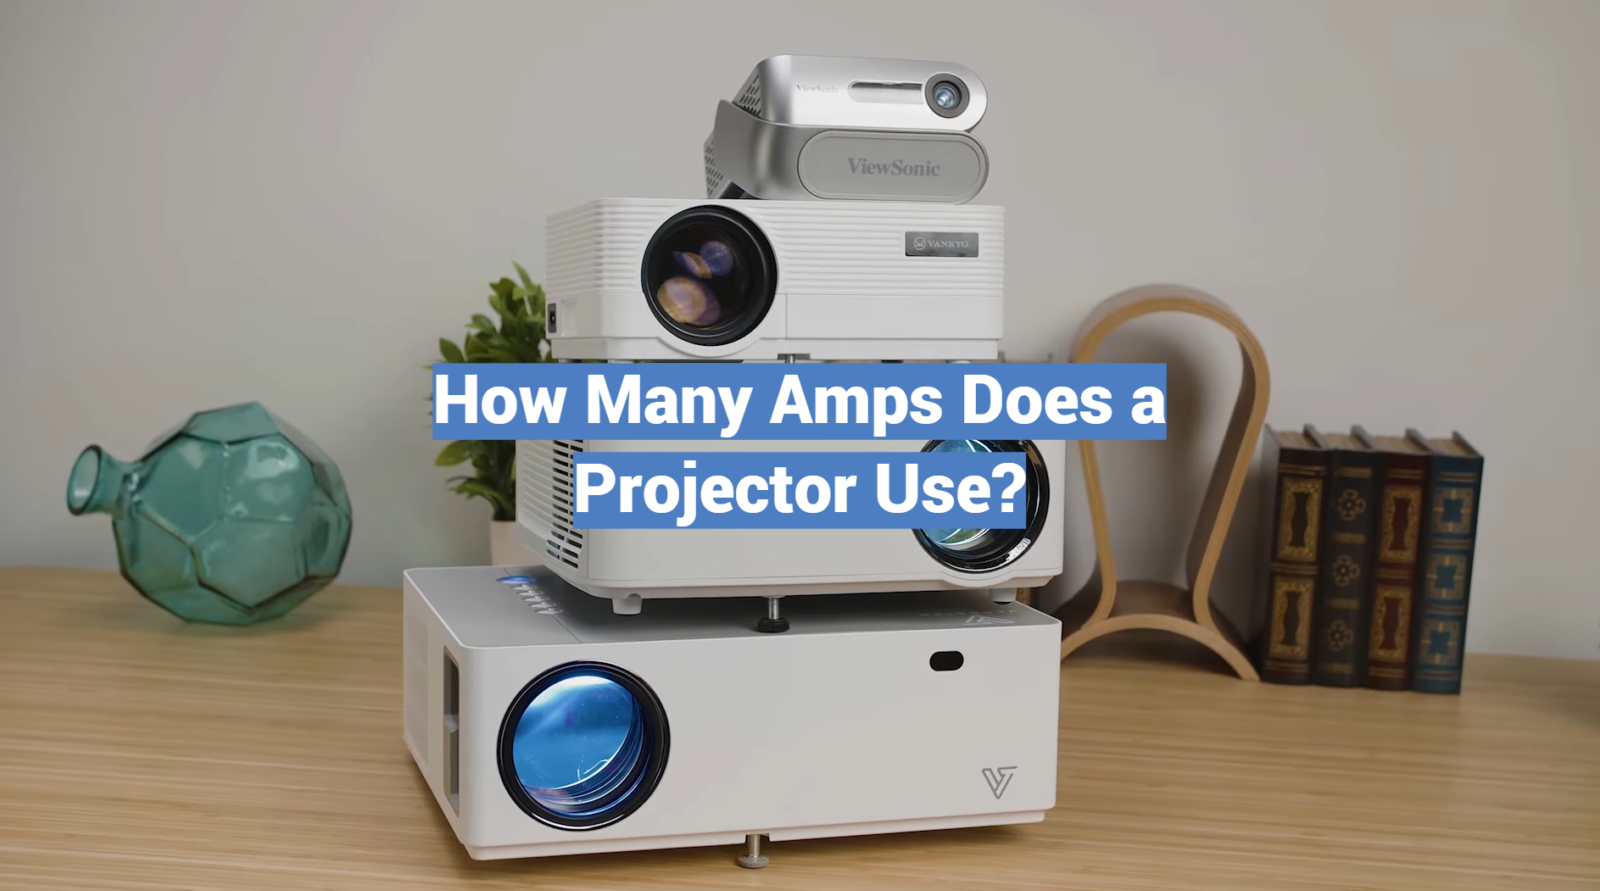 How Many Amps Does a Projector Use?